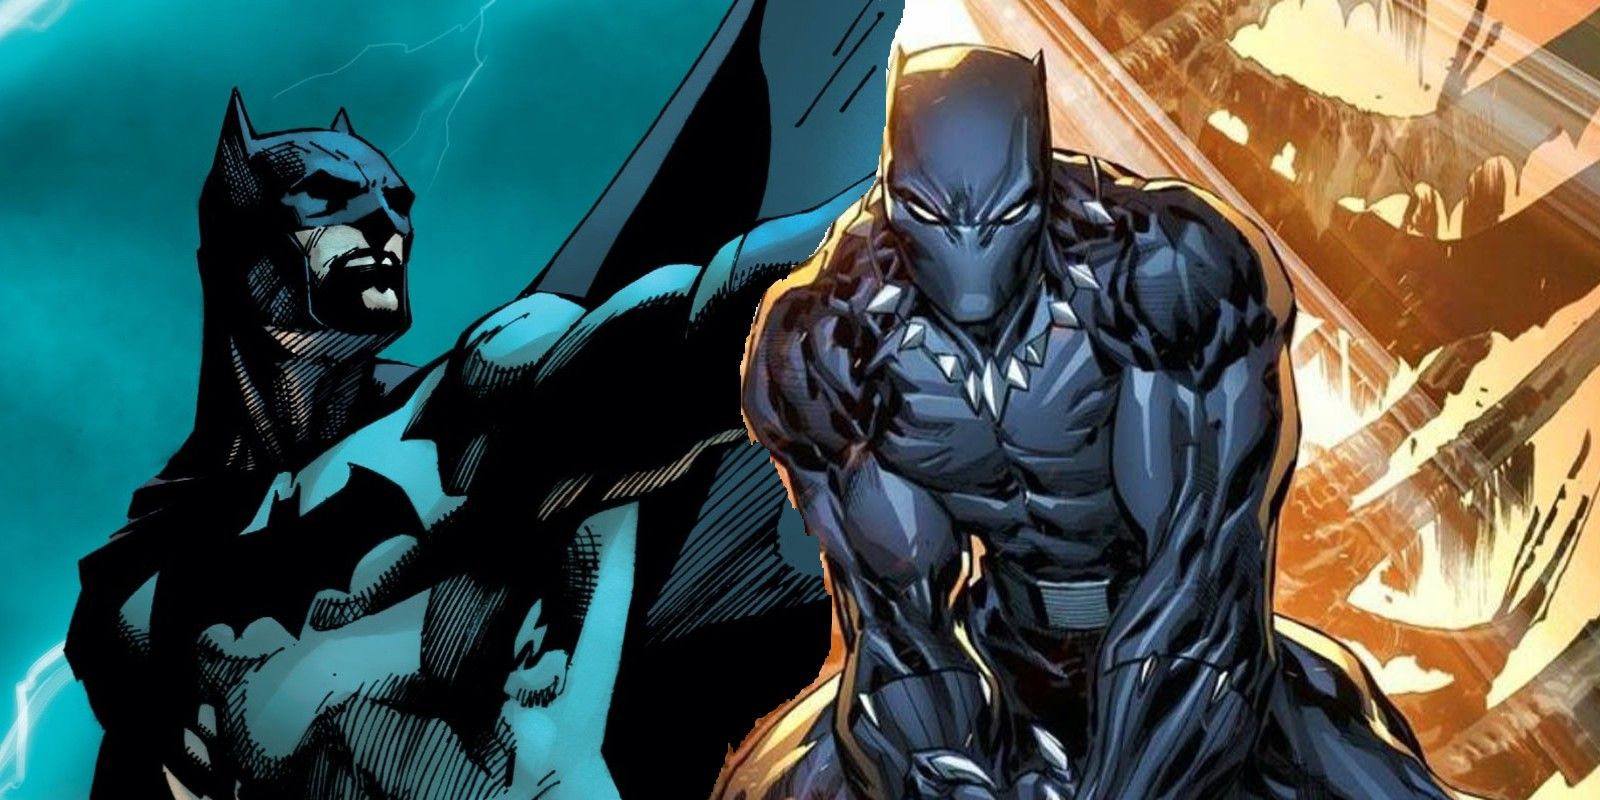 Batman vs. Black Panther: Who Would Win in a Fight